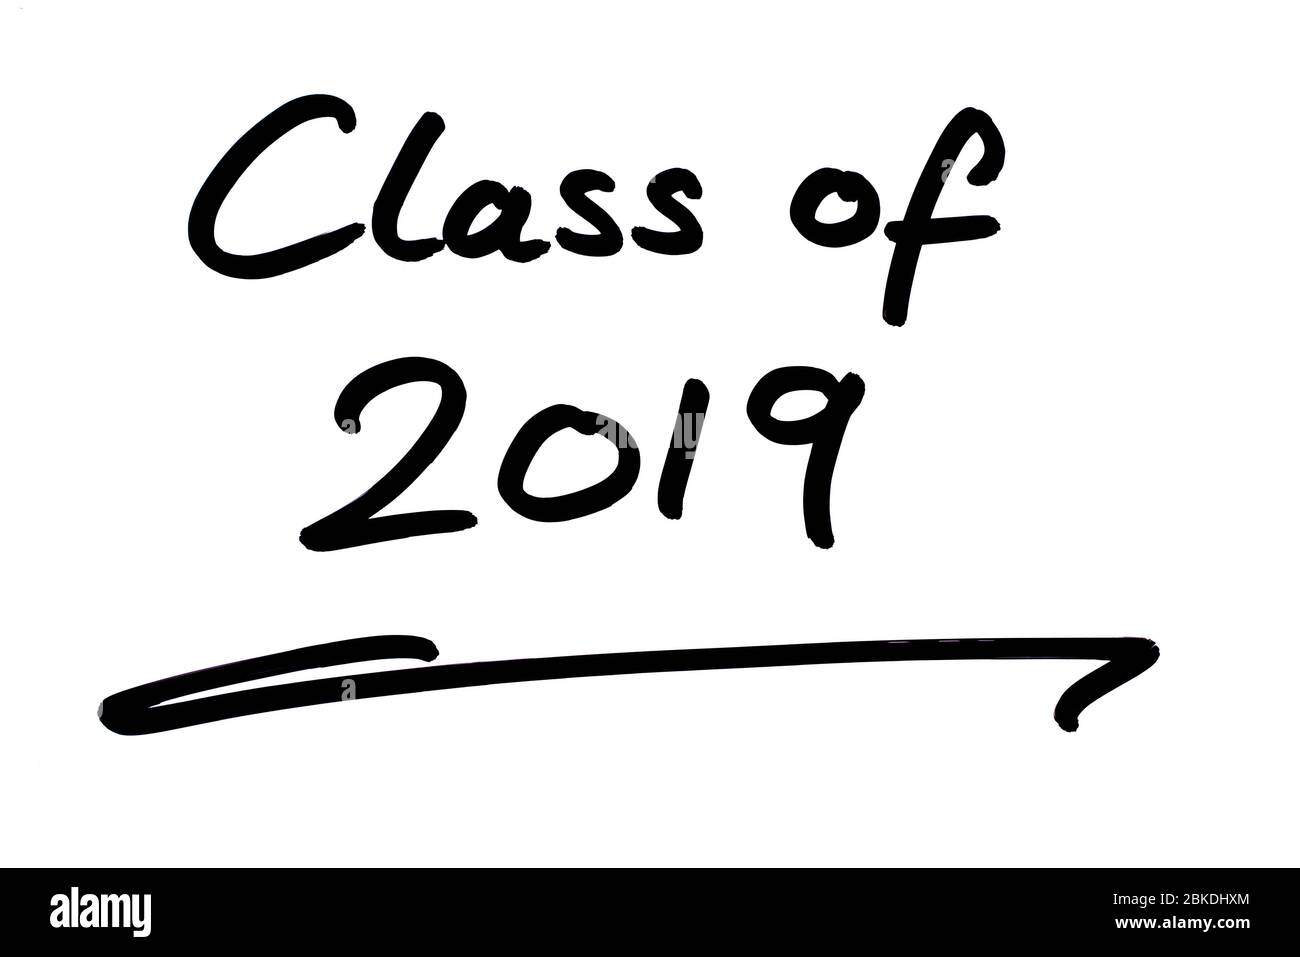 Class of 2019 handwritten on a white background. Stock Photo